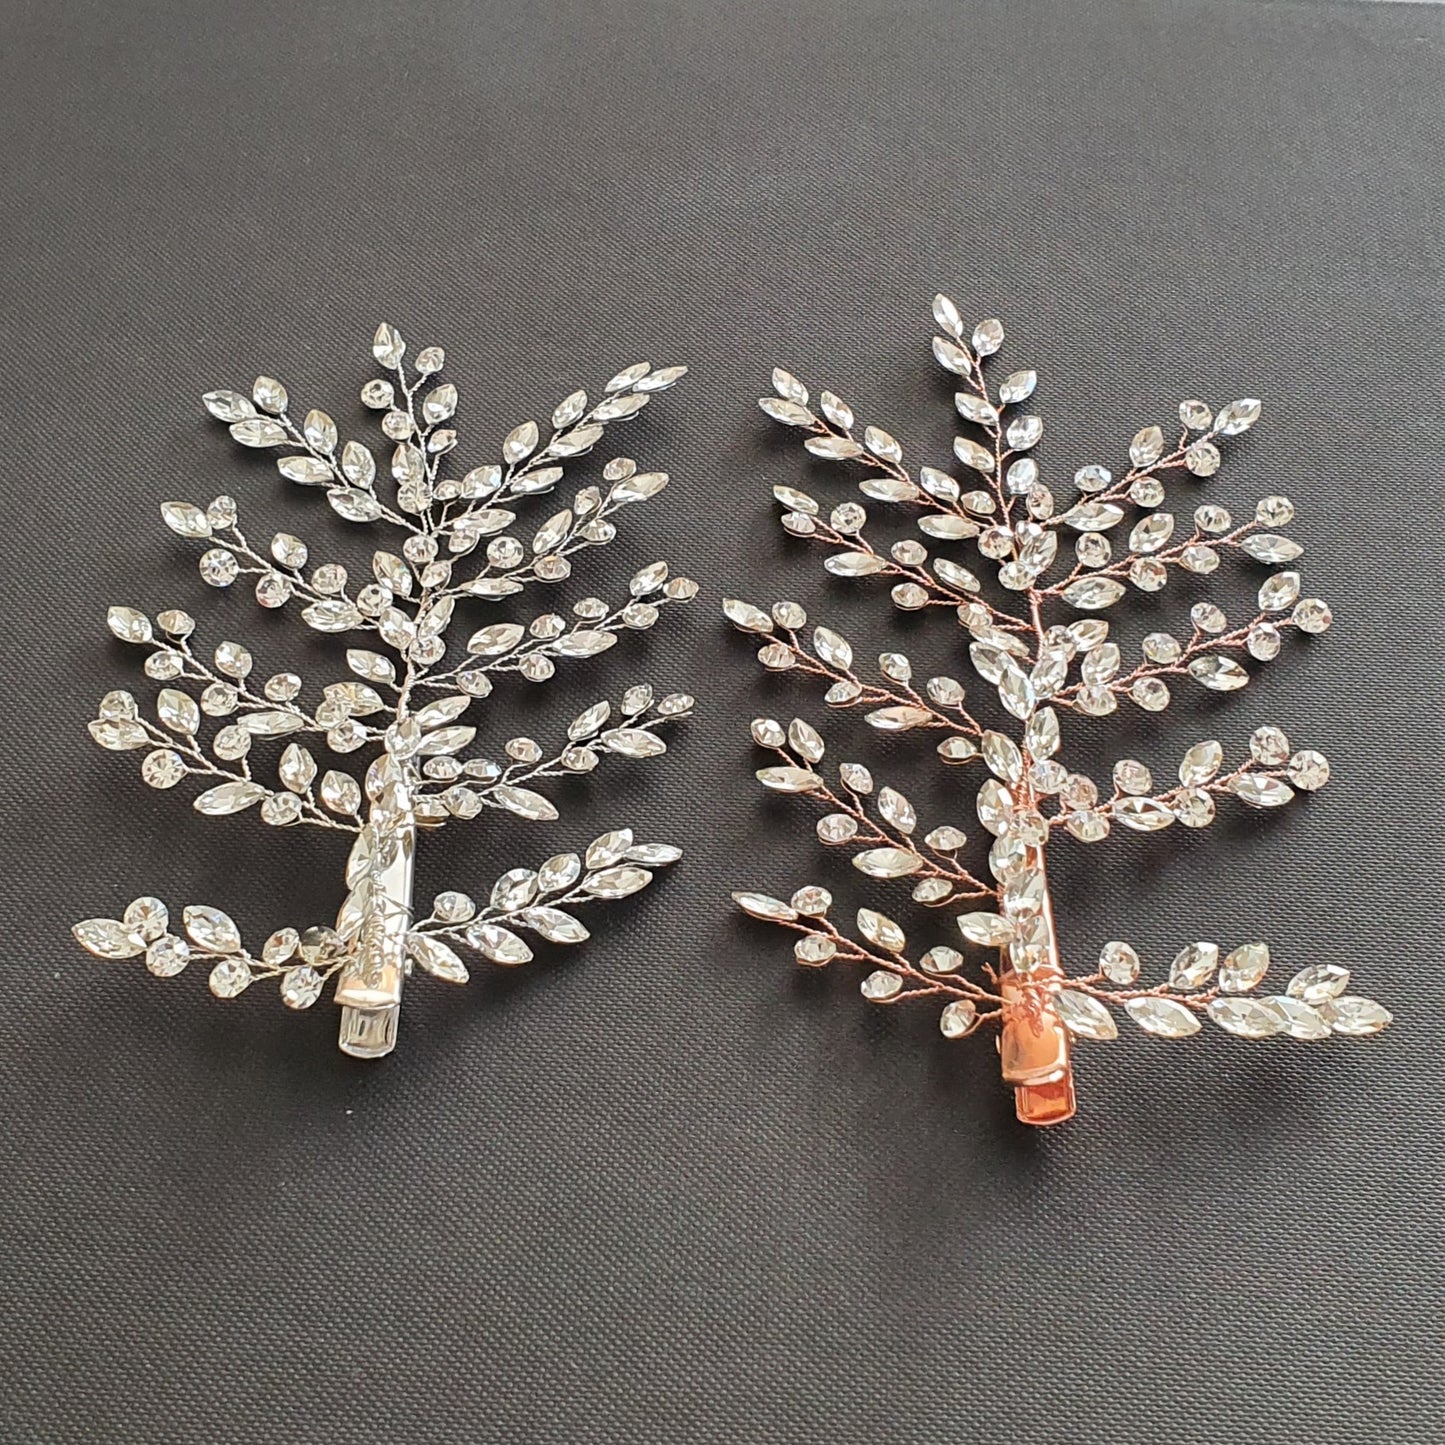 Bridal Hair Clip with Tiny Crystal Leaves-Fern